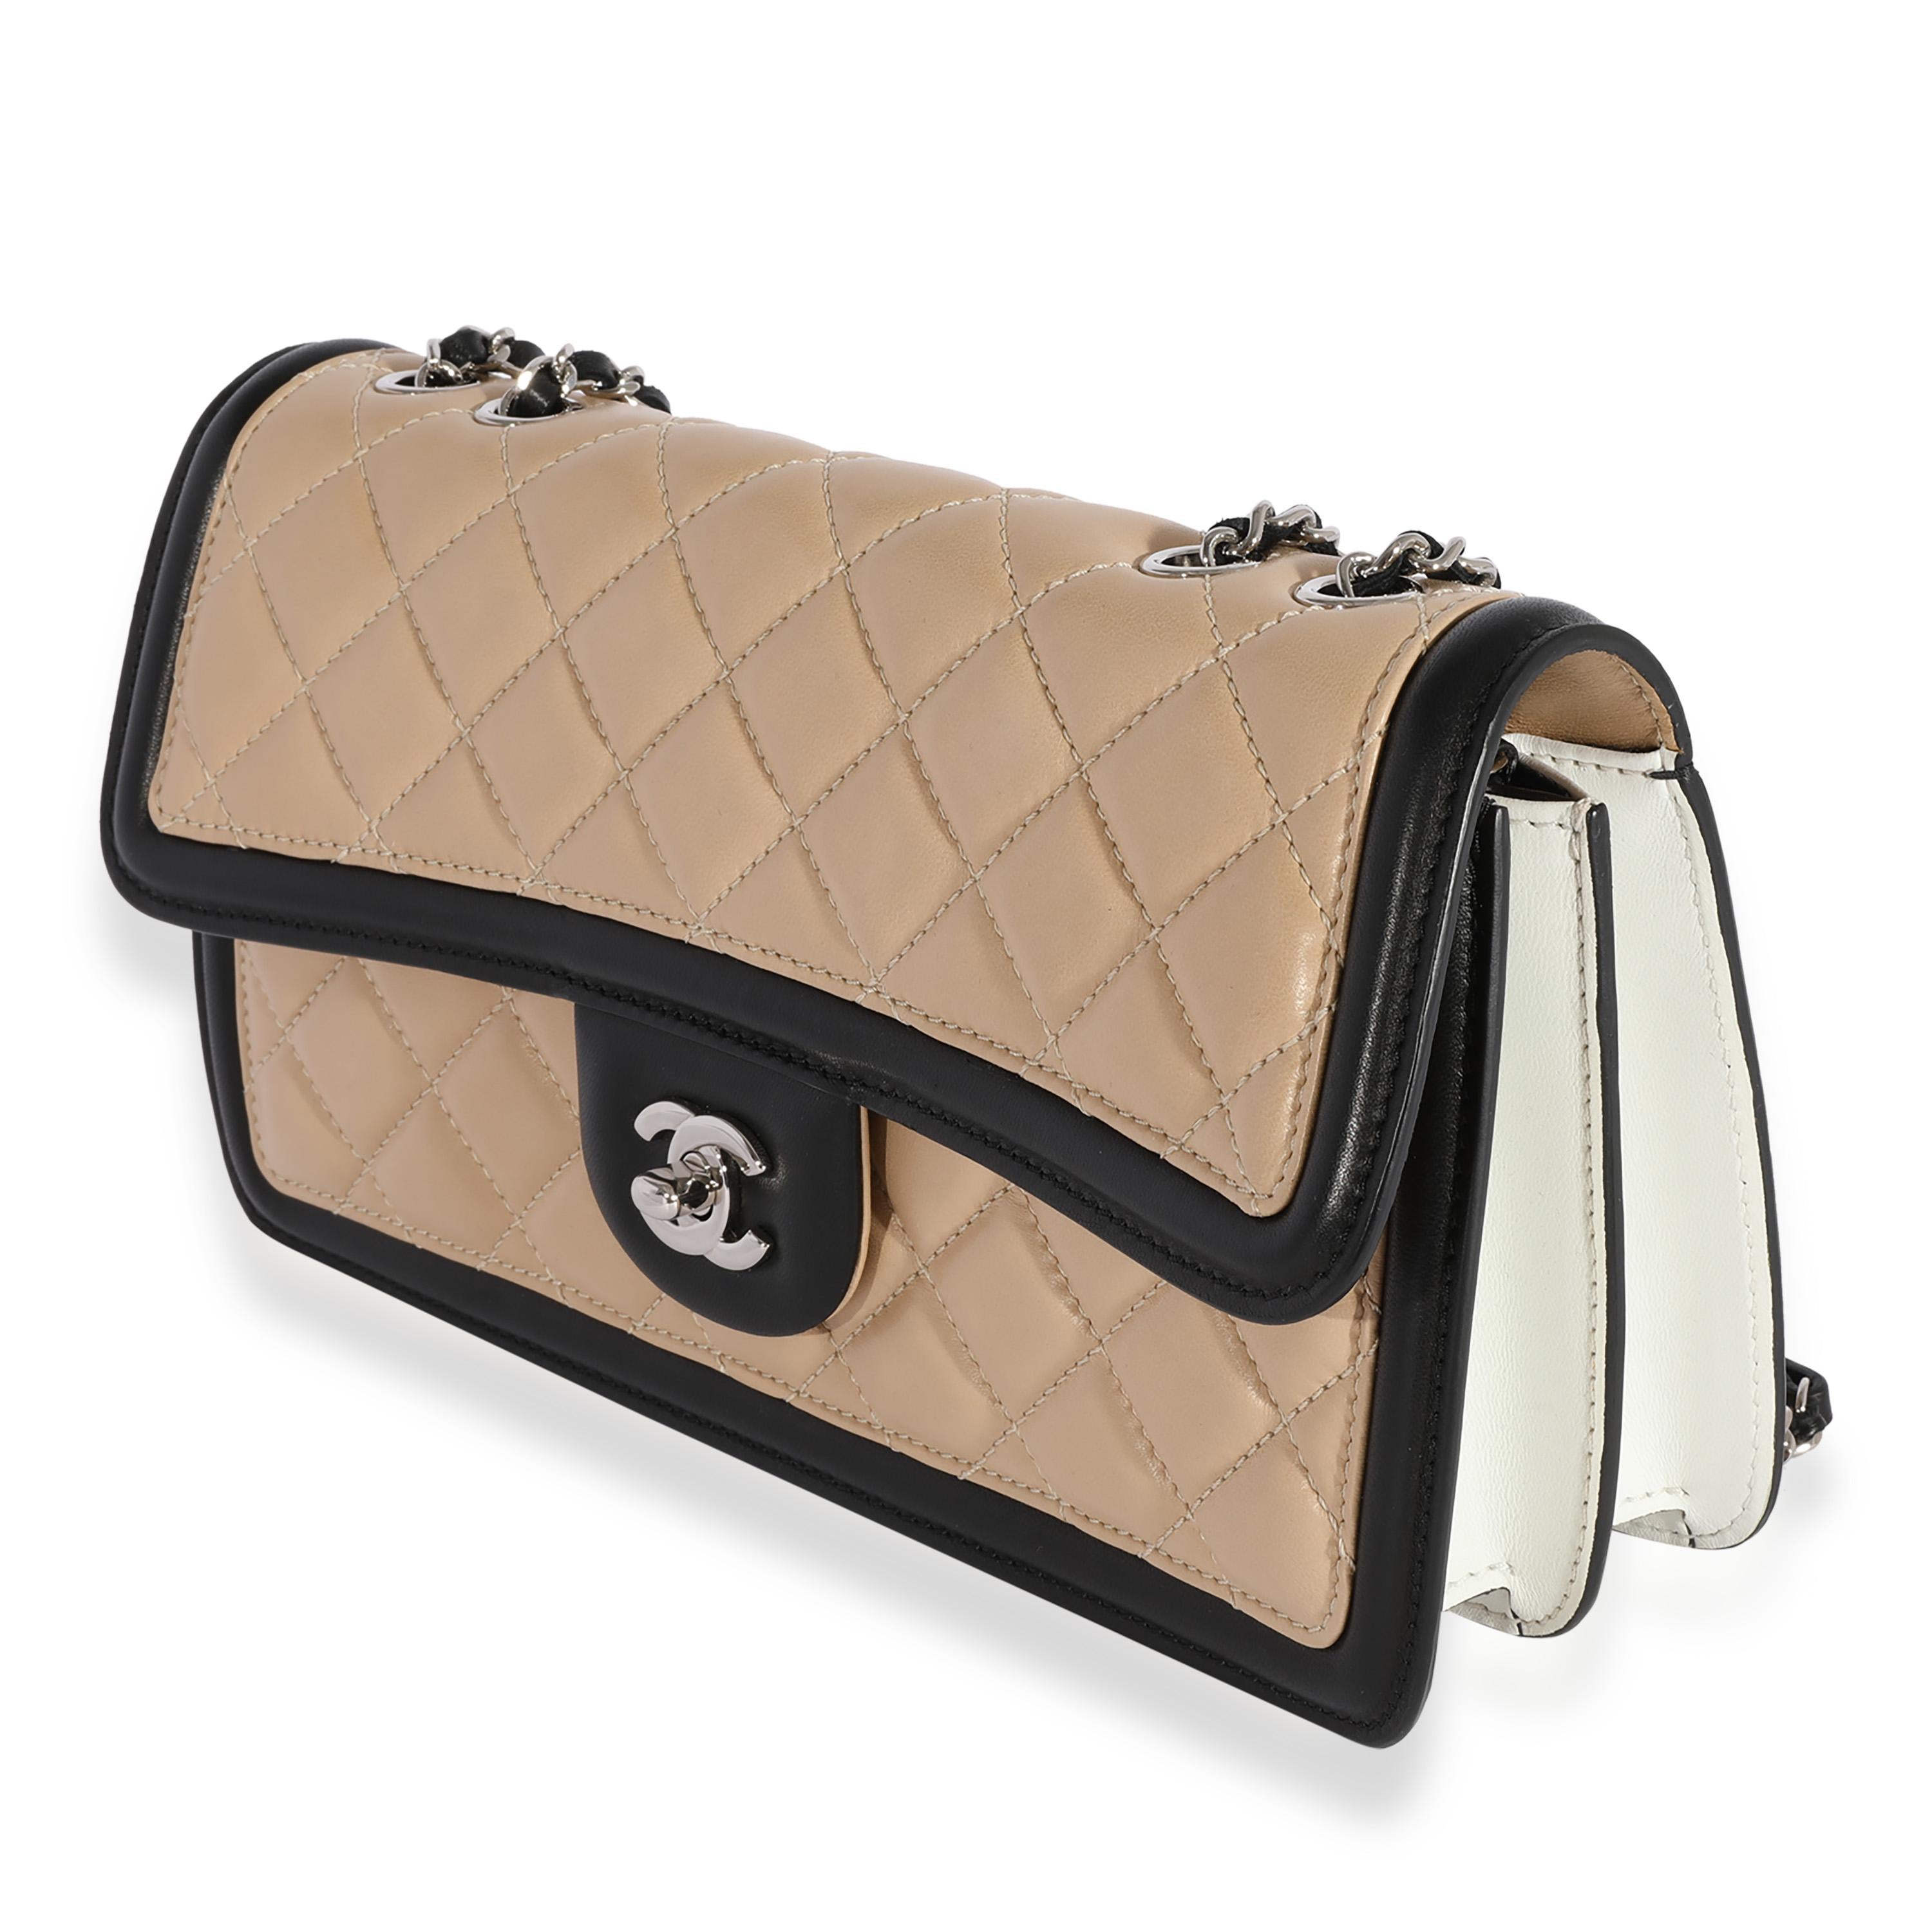 Beige Chanel Tricolor Quilted Lambskin Medium Graphic Flap Bag